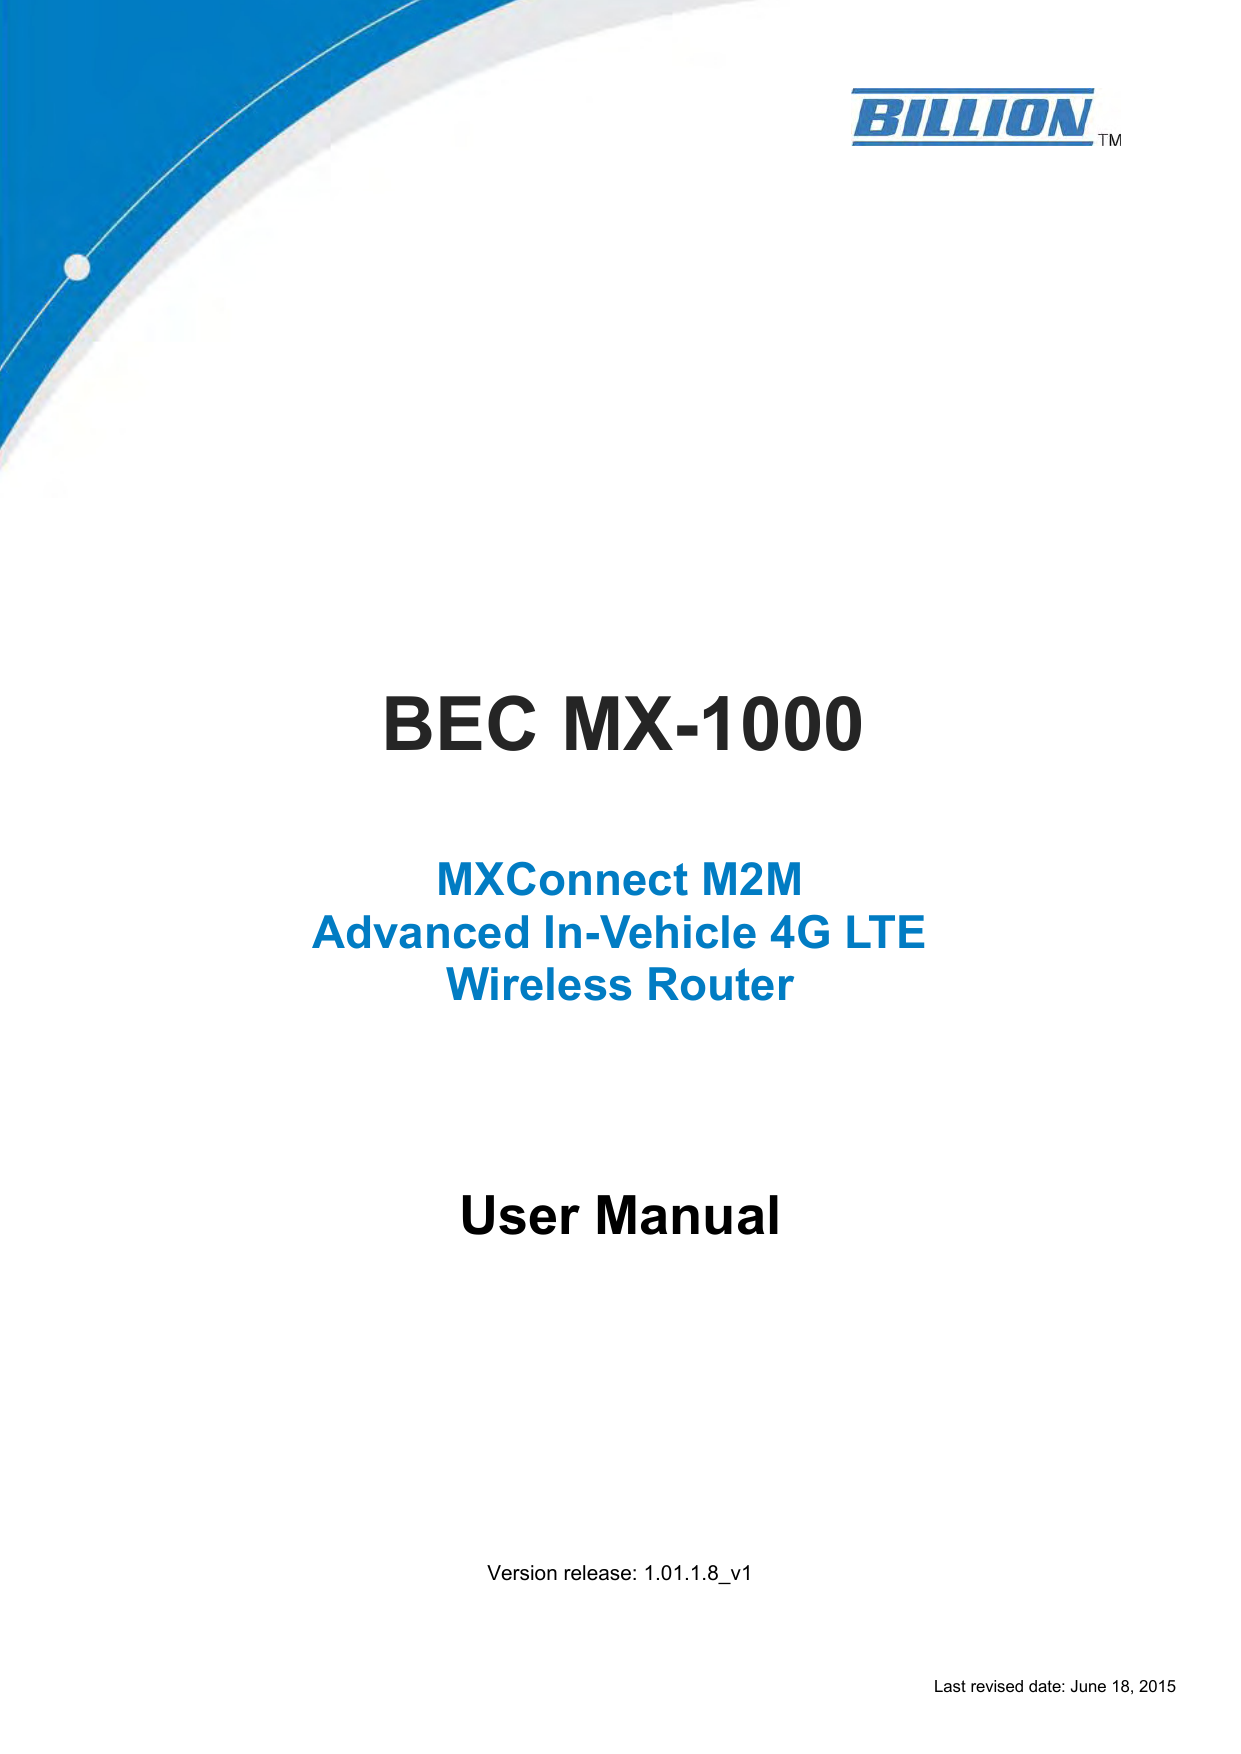 Last revised date: June 18, 2015                       BEC MX-1000    MXConnect M2M Advanced In-Vehicle 4G LTE Wireless Router       User Manual           Version release: 1.01.1.8_v1 